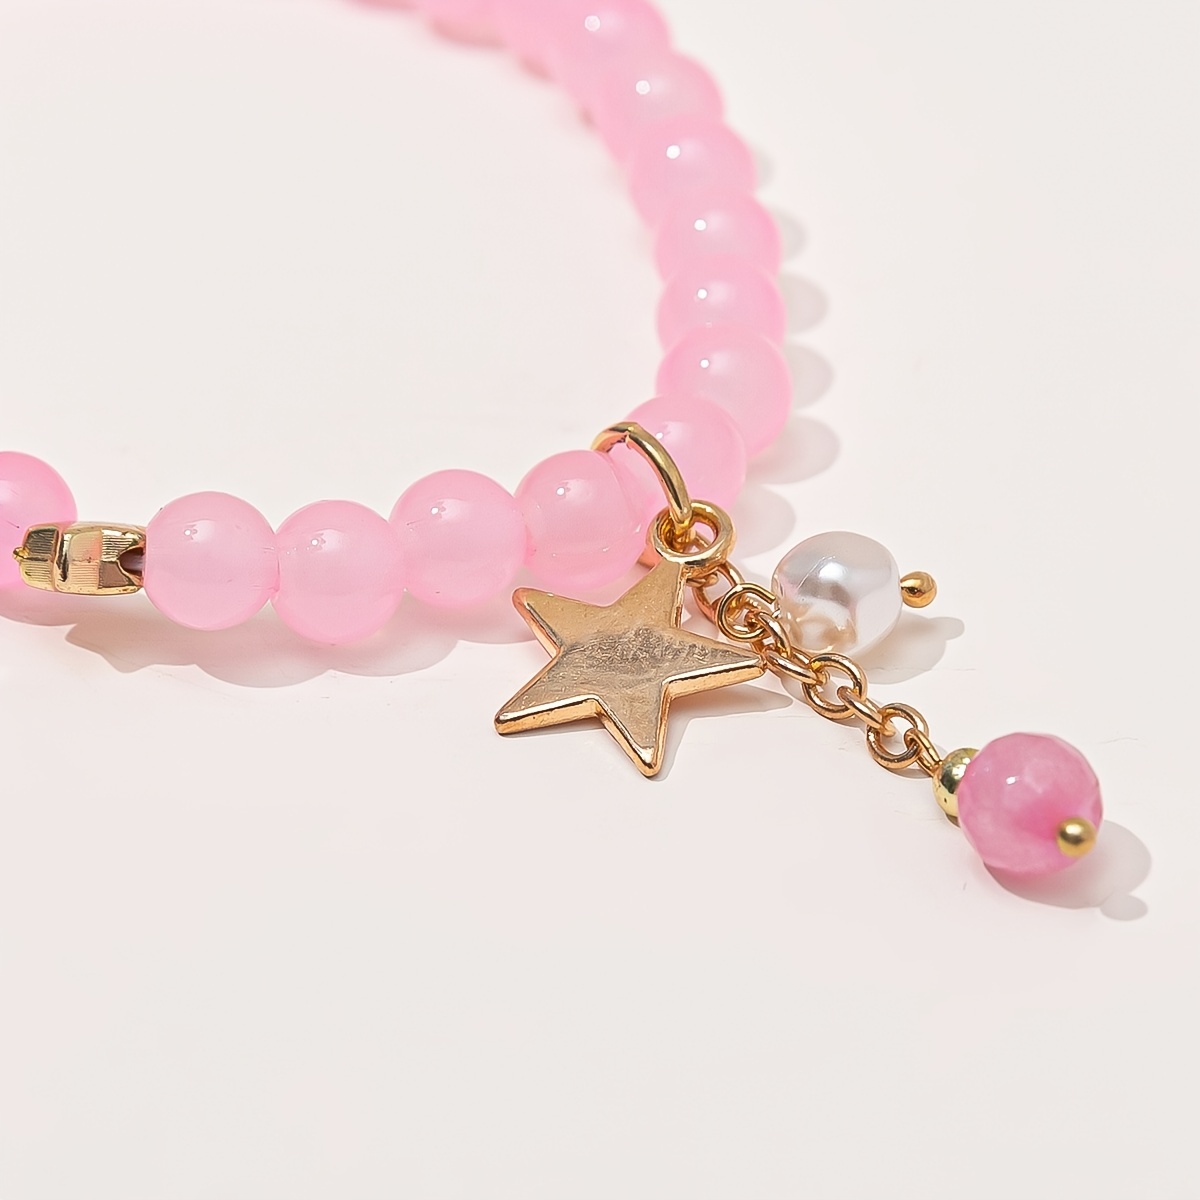 Pink Star Crystal Bracelet with Extension Chain